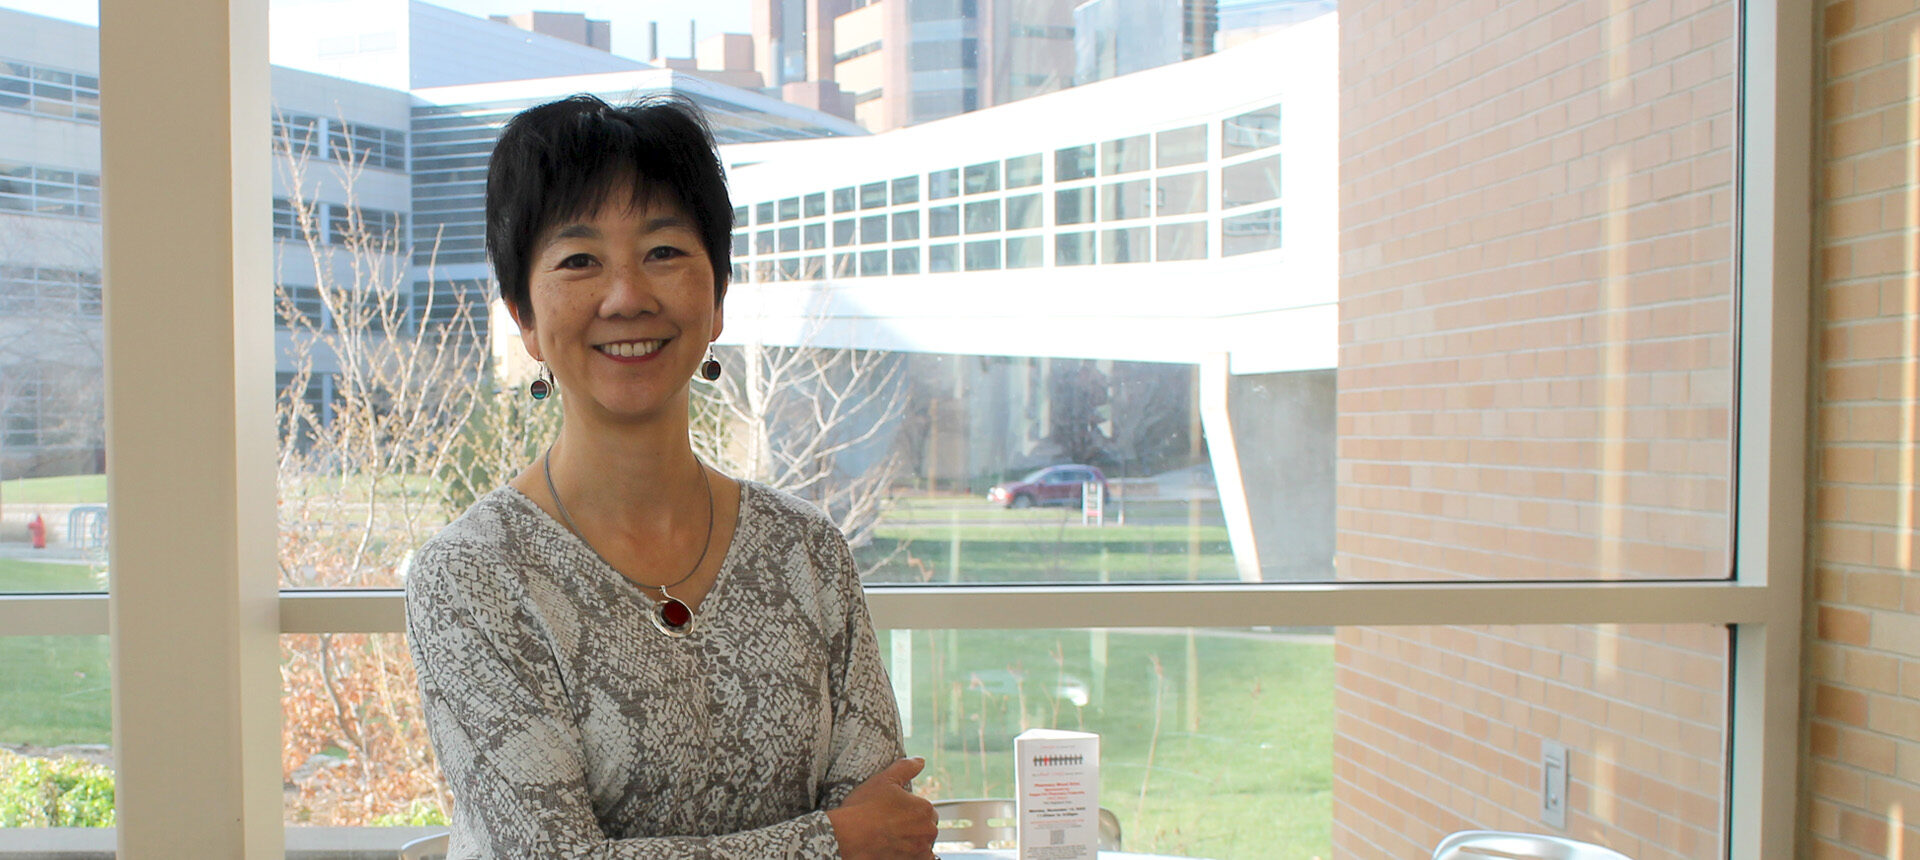 Michelle Chui stands in the School of Pharmacy Mezzanine, with the UW Hospital visible in the background